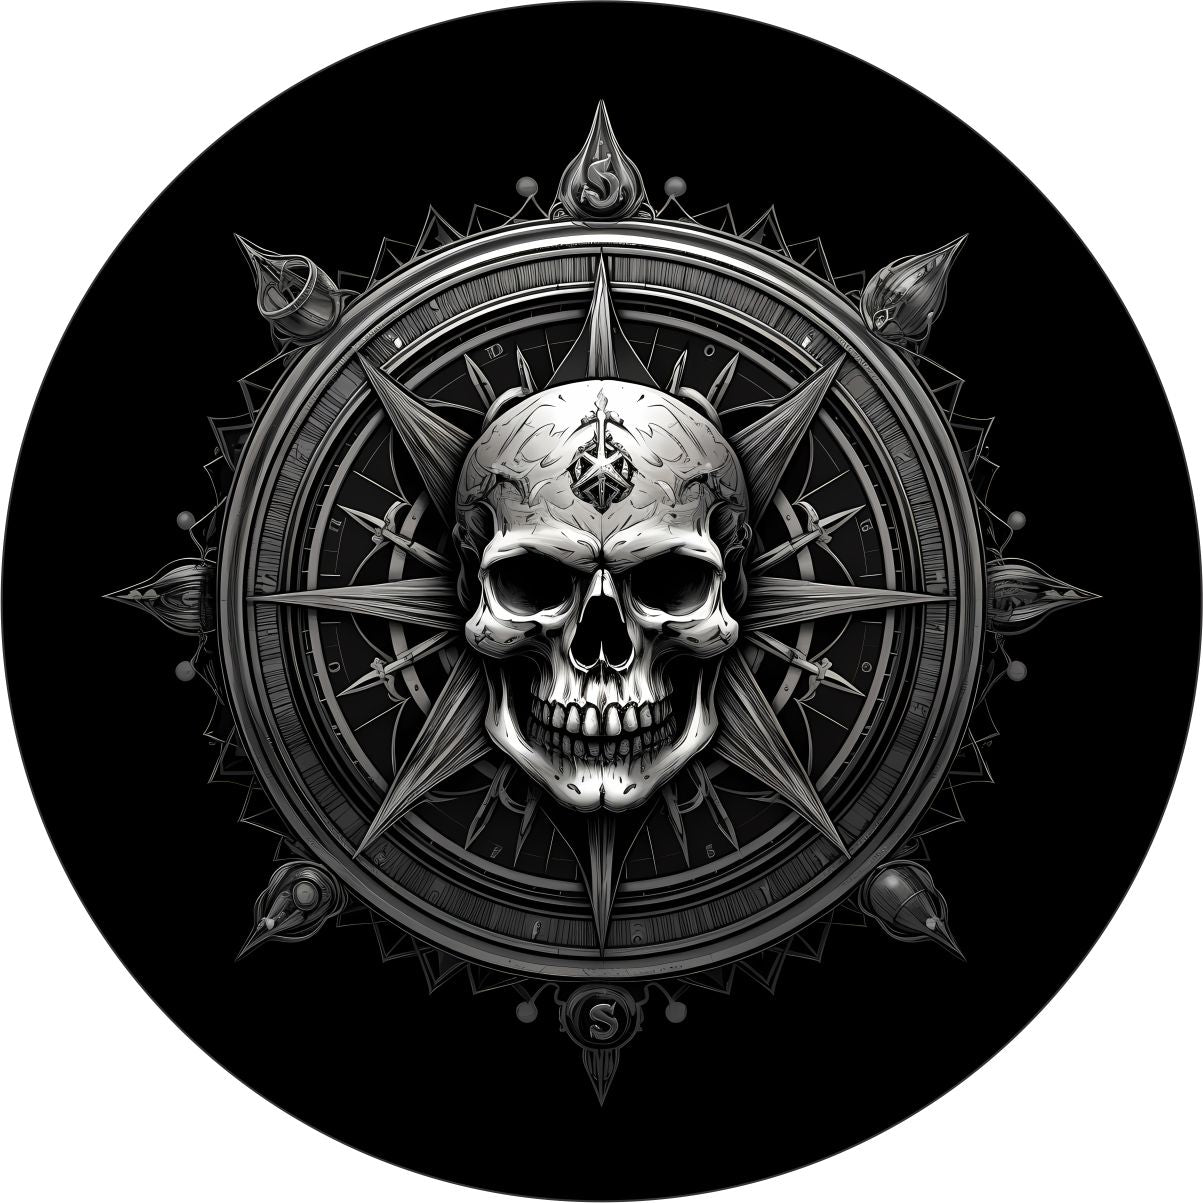 Black spare tire cover mock up with what looks like a metal compass and helm with a mean skull in the center.